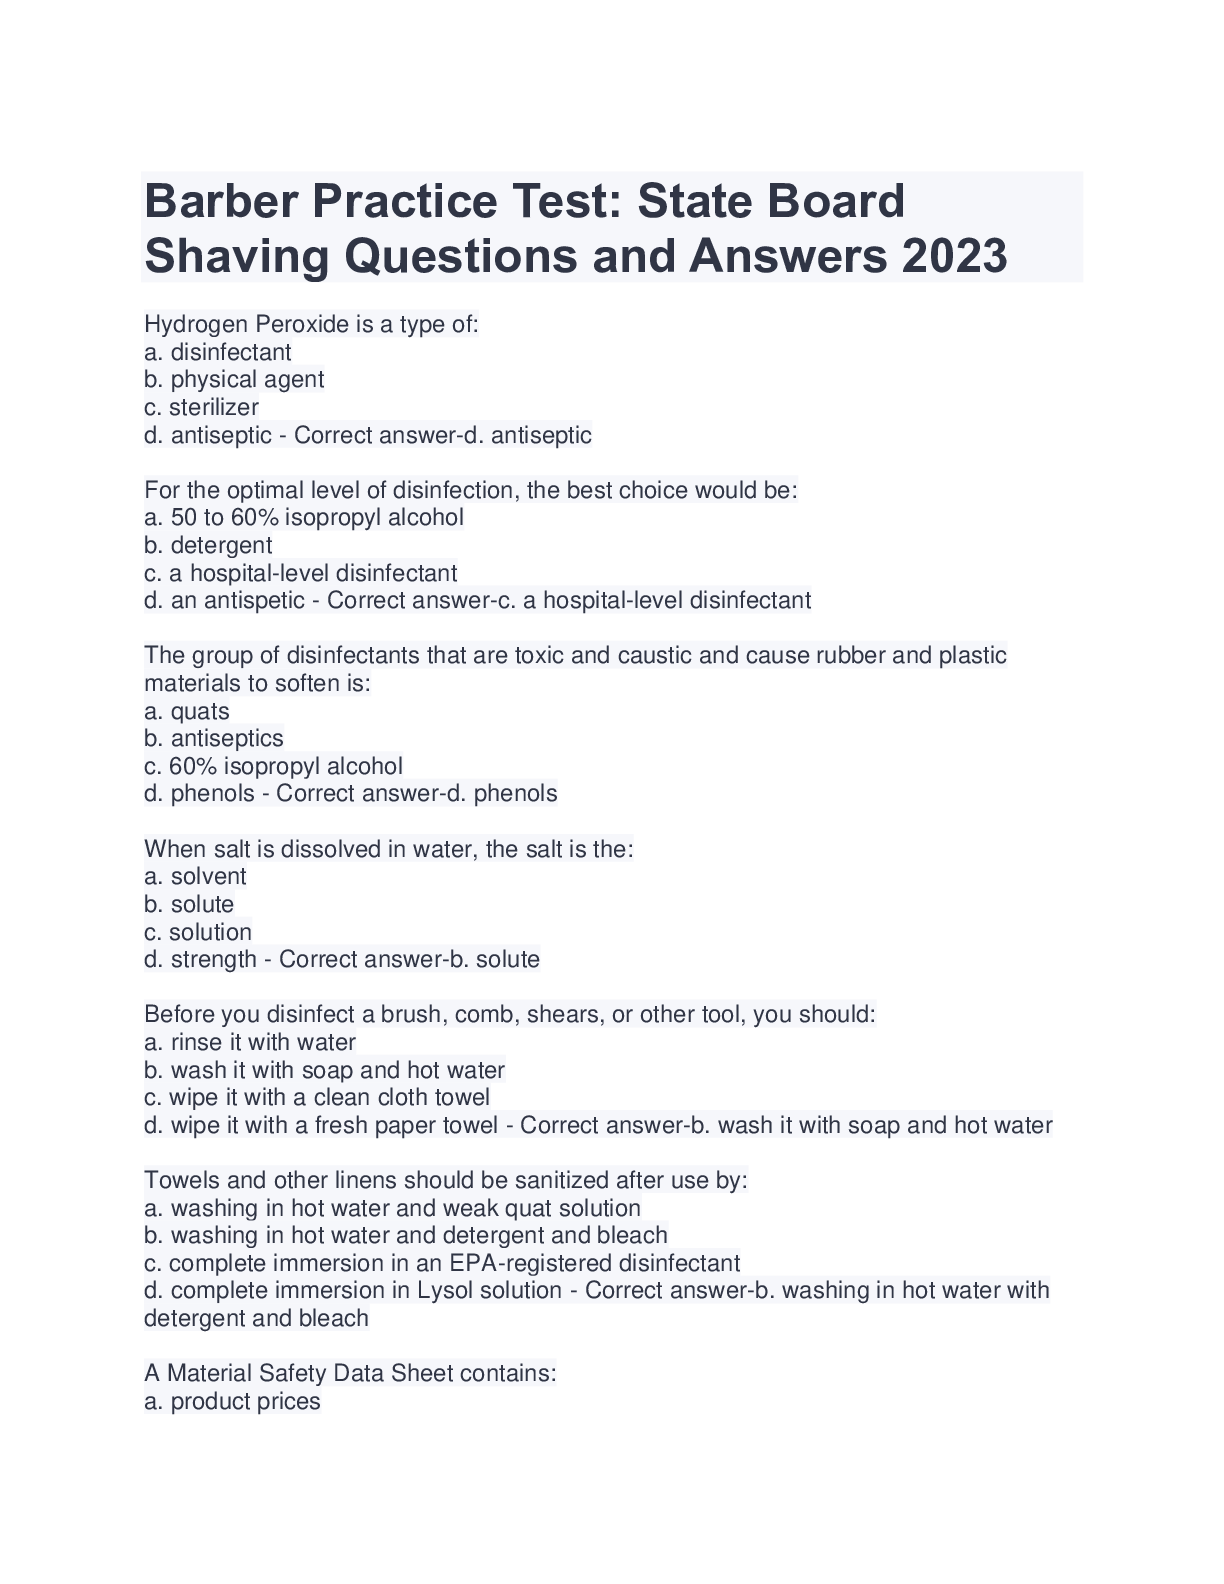 Barber Practice Test State BoardShaving Questions and Answers 2023